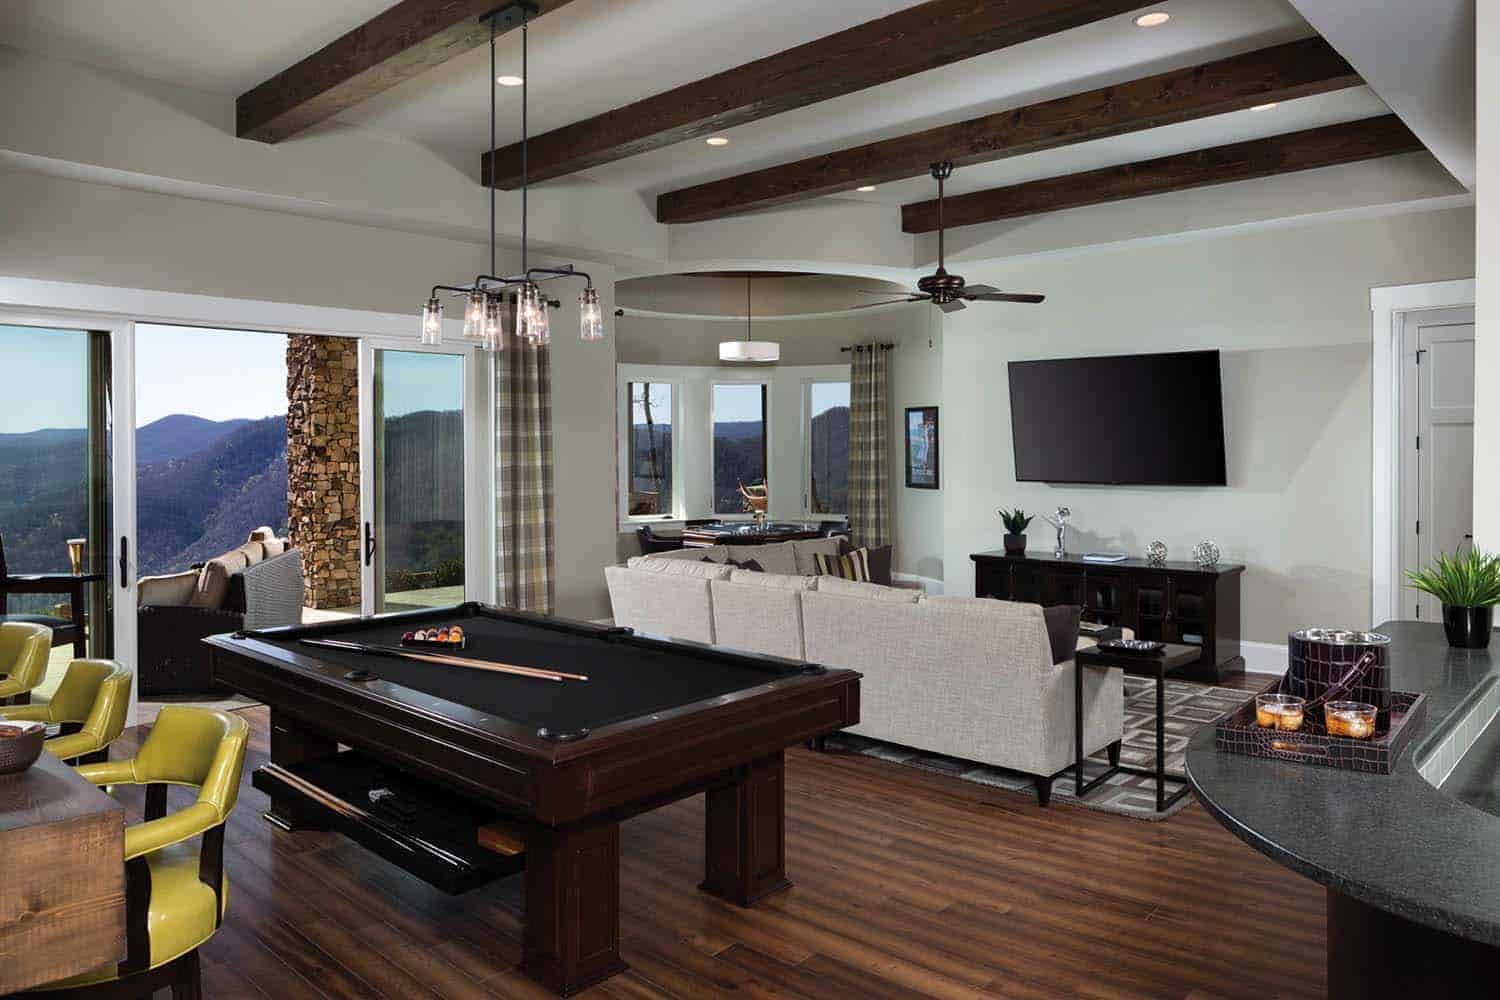 traditional-family-room